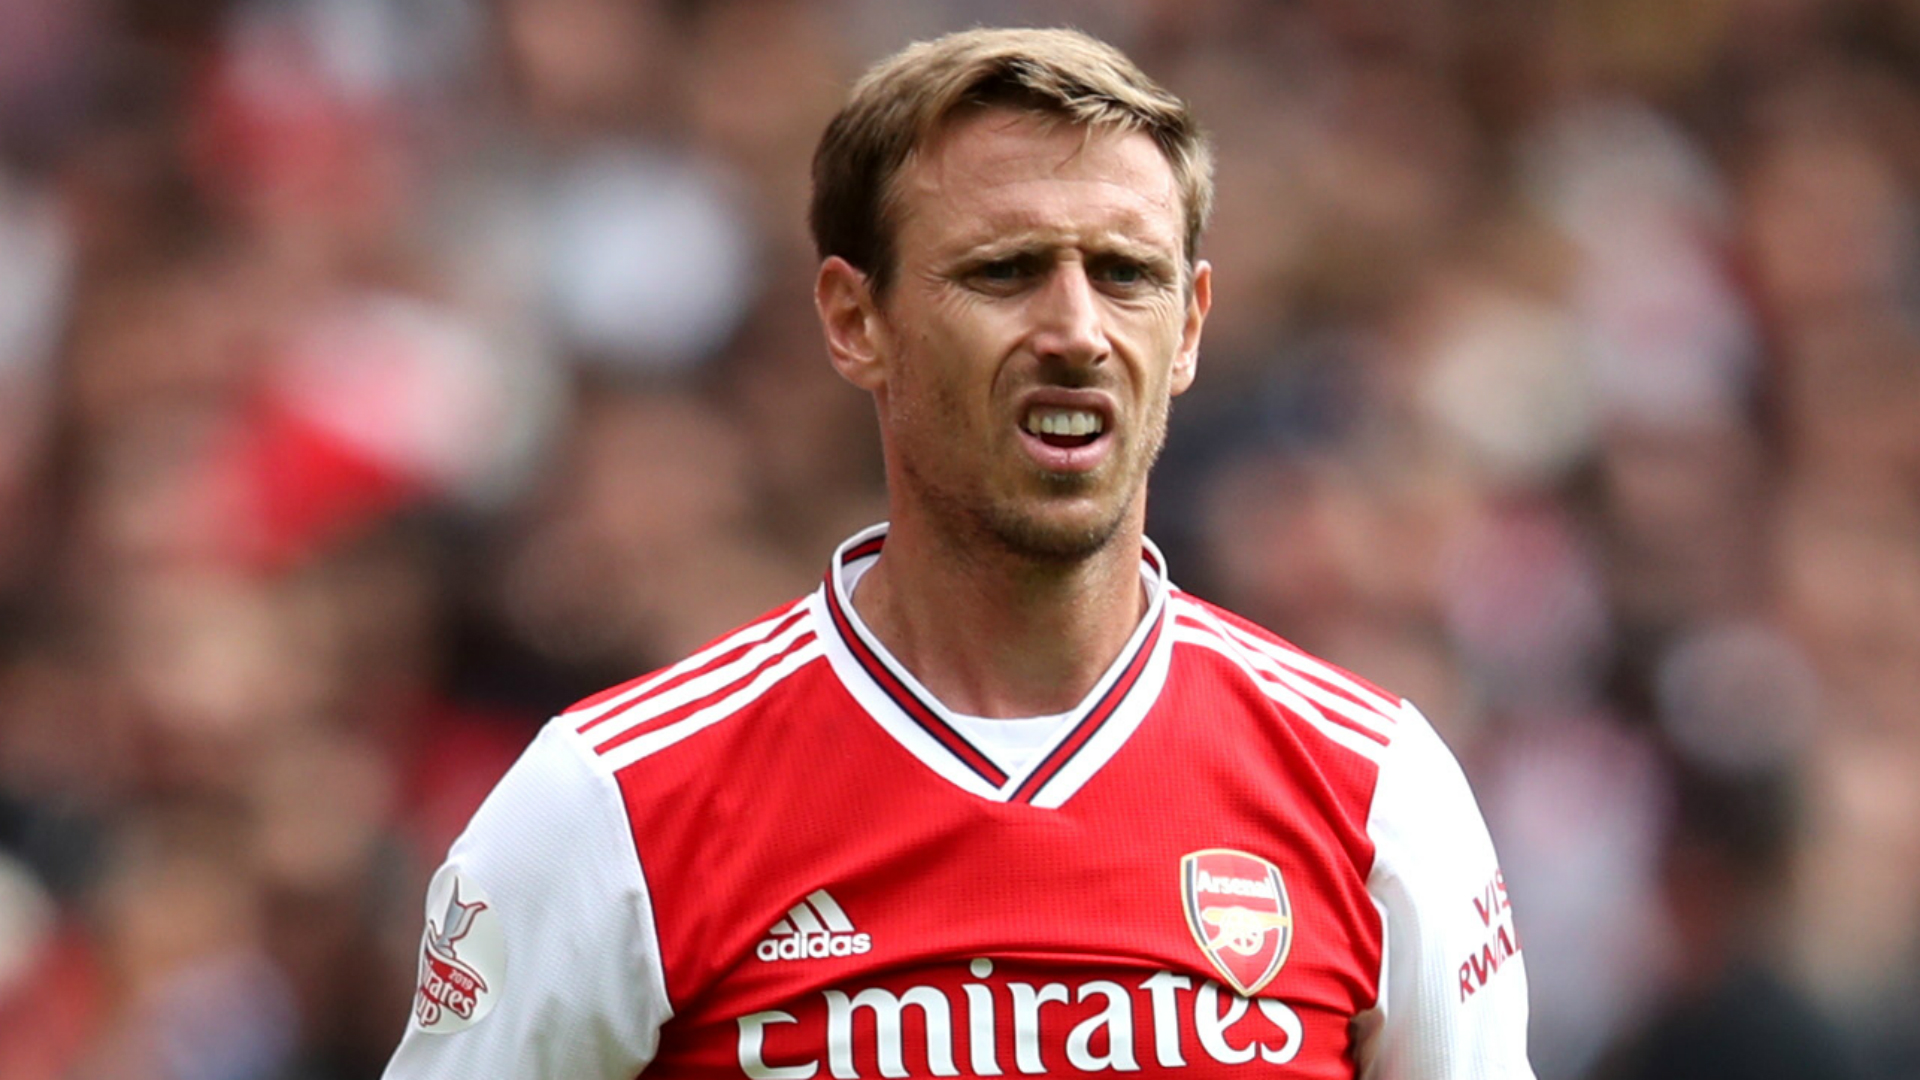 Linked to Real Sociedad, Arsenal boss Unai Emery discussed Nacho Monreal's future following Saturday's loss to Liverpool.